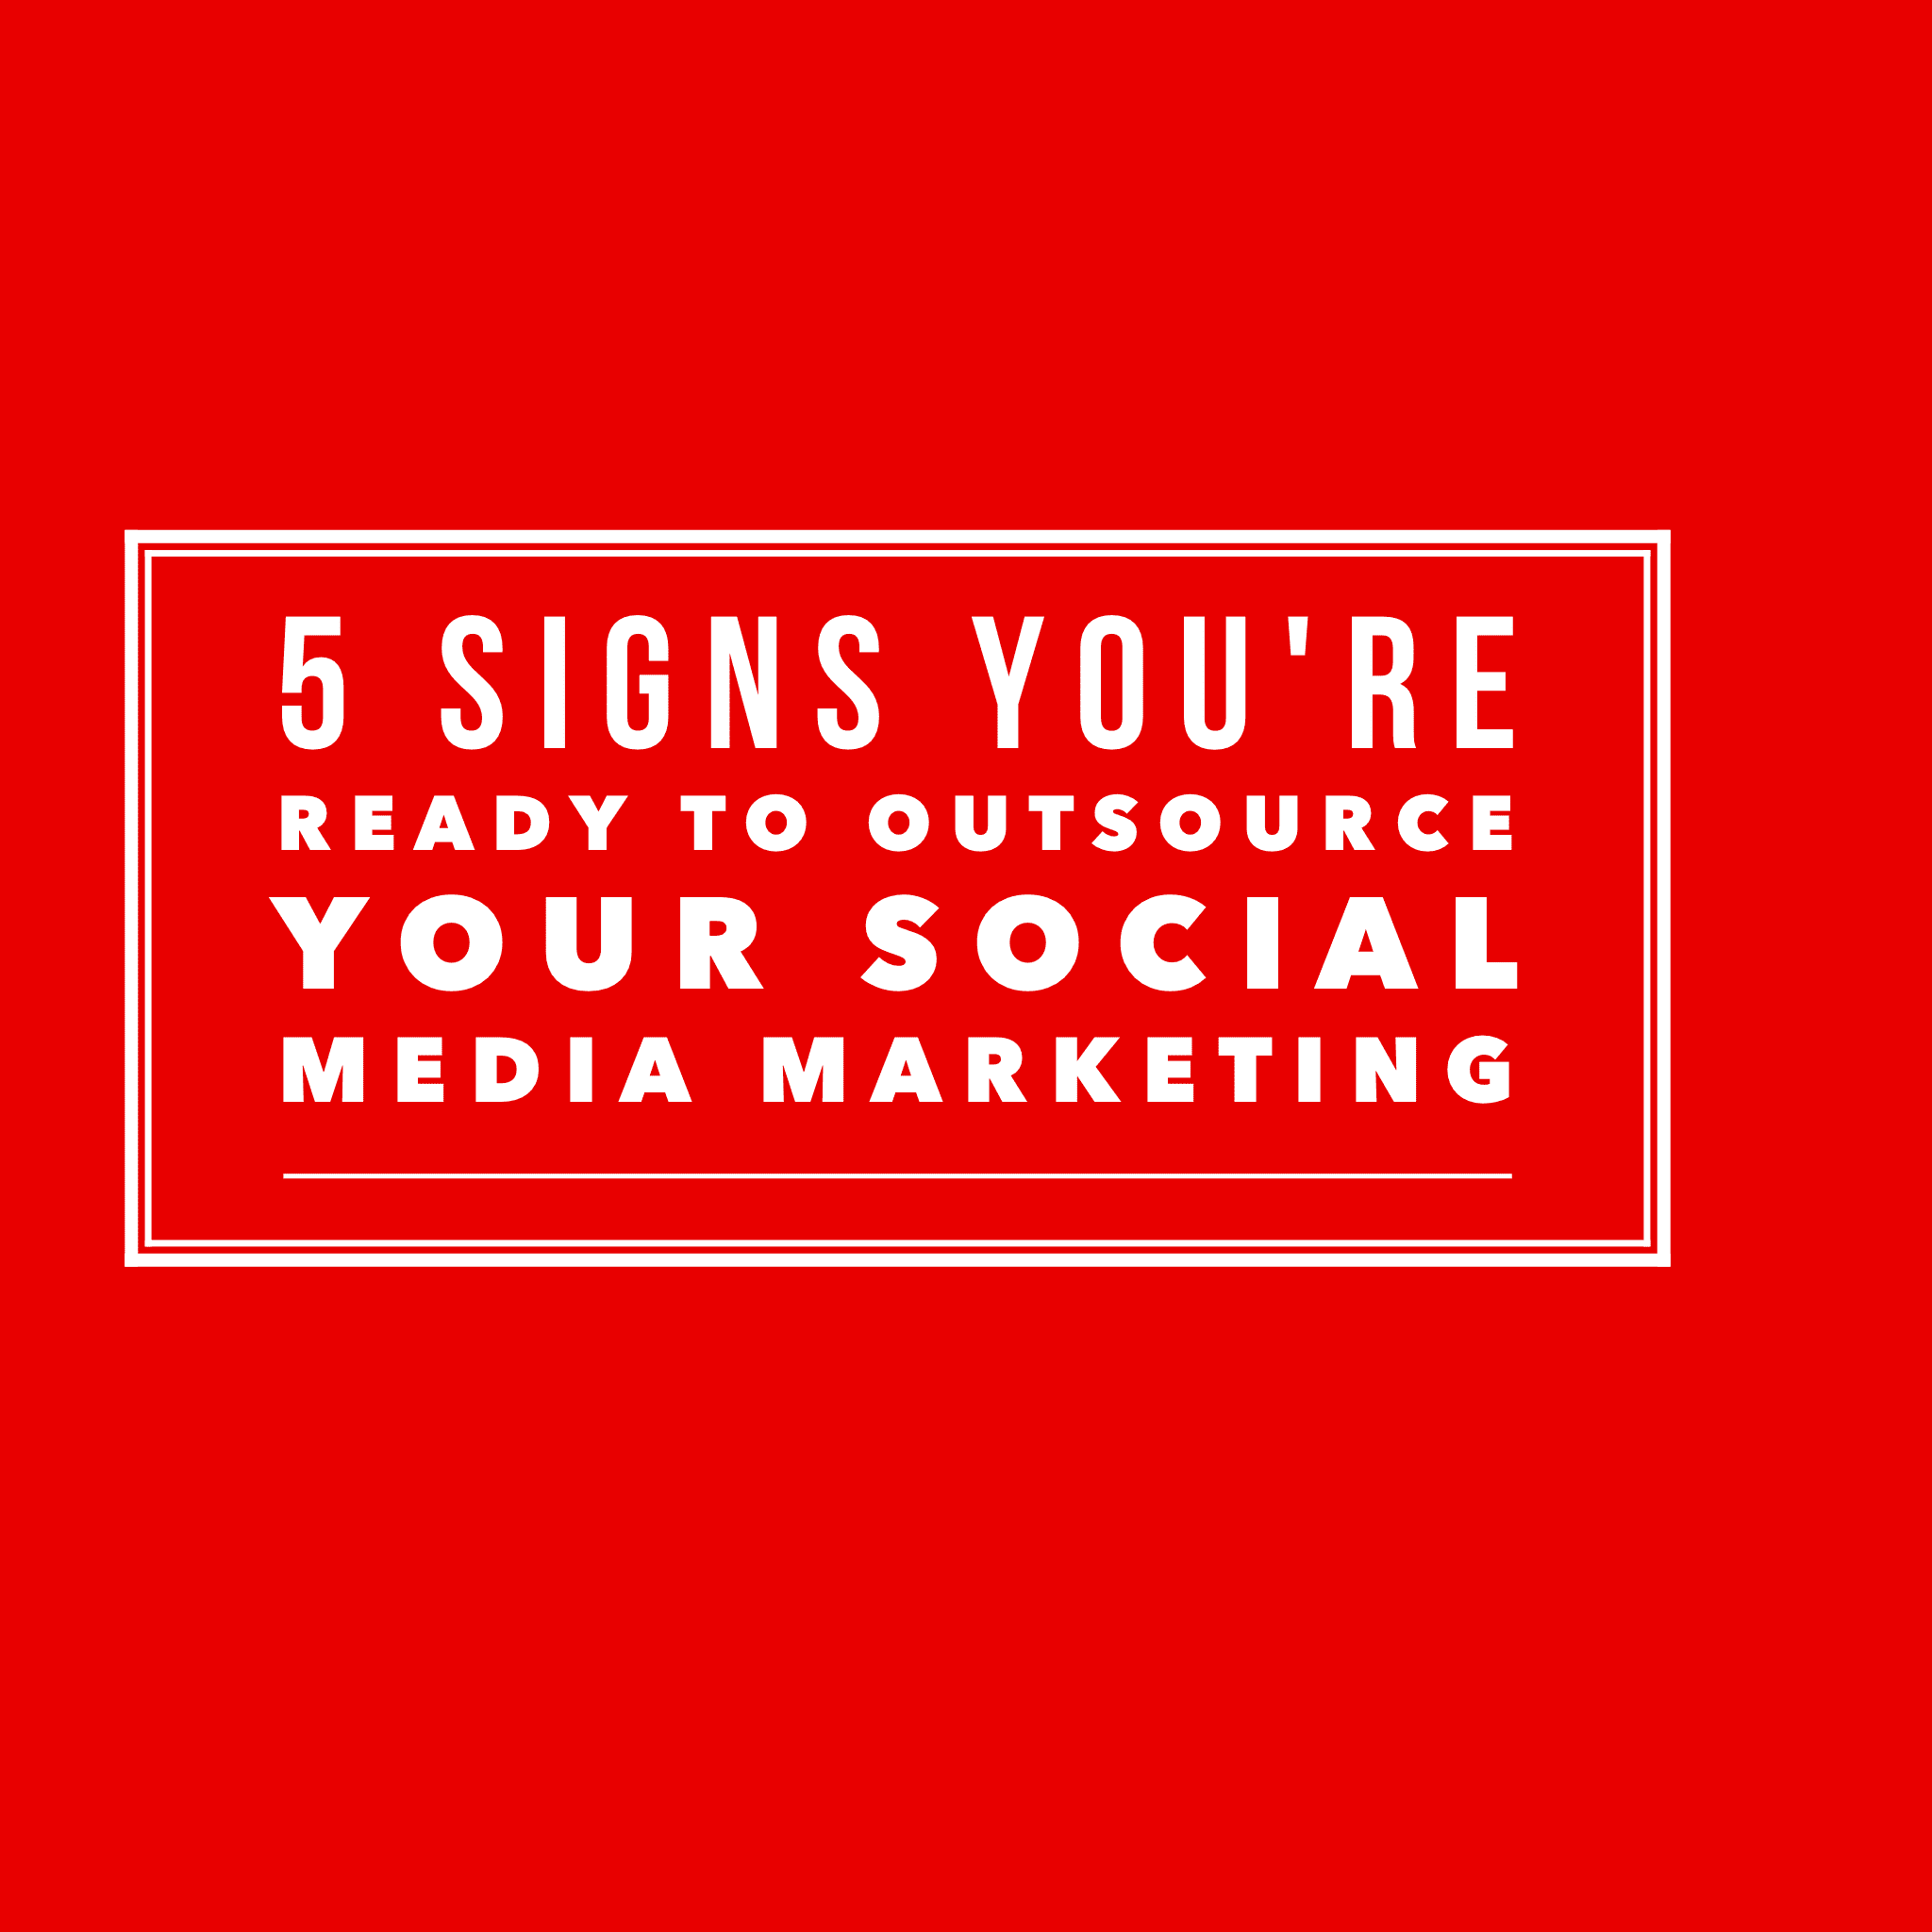 5 Signs You’re Ready To Outsource Your Social Media Marketing